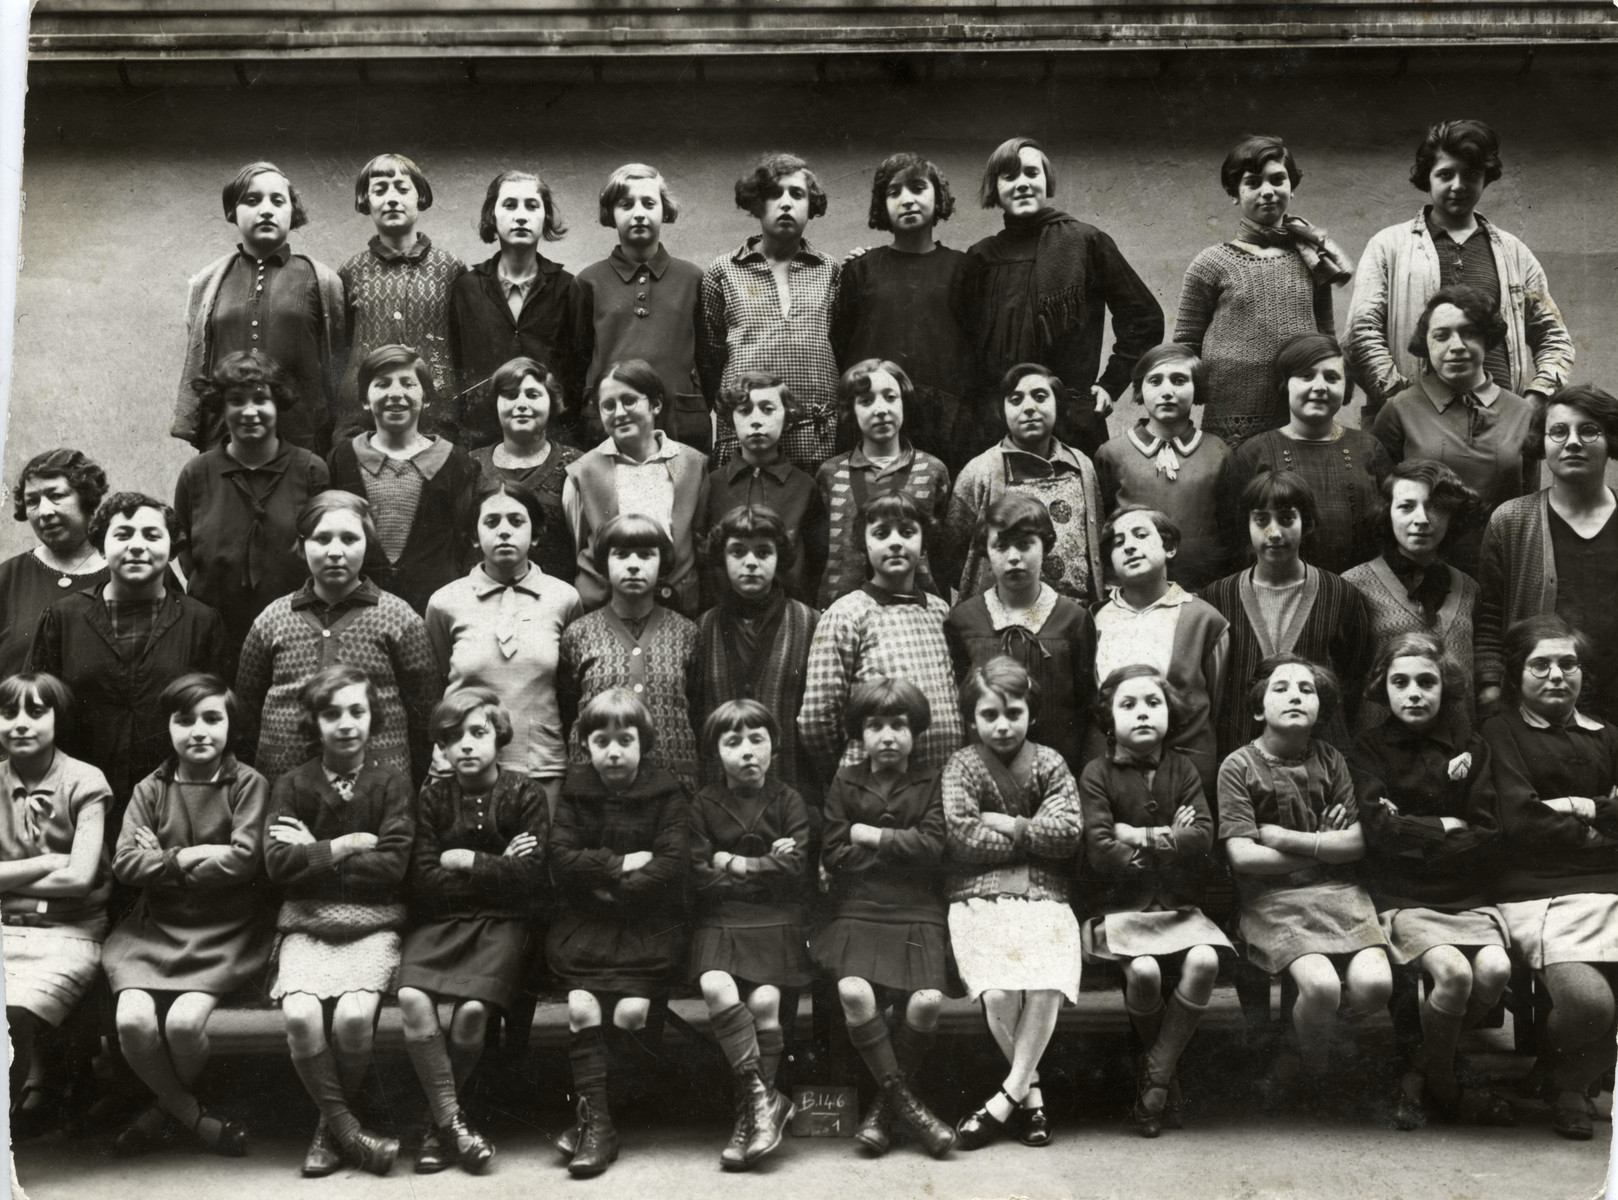 Group portrait of the girls in the Ecole Israelites, Hospitaliers St. Gervais, a school for Jewish refugees in Paris.

Miriam Einhorn is pictured in the top row, fifth from the left.